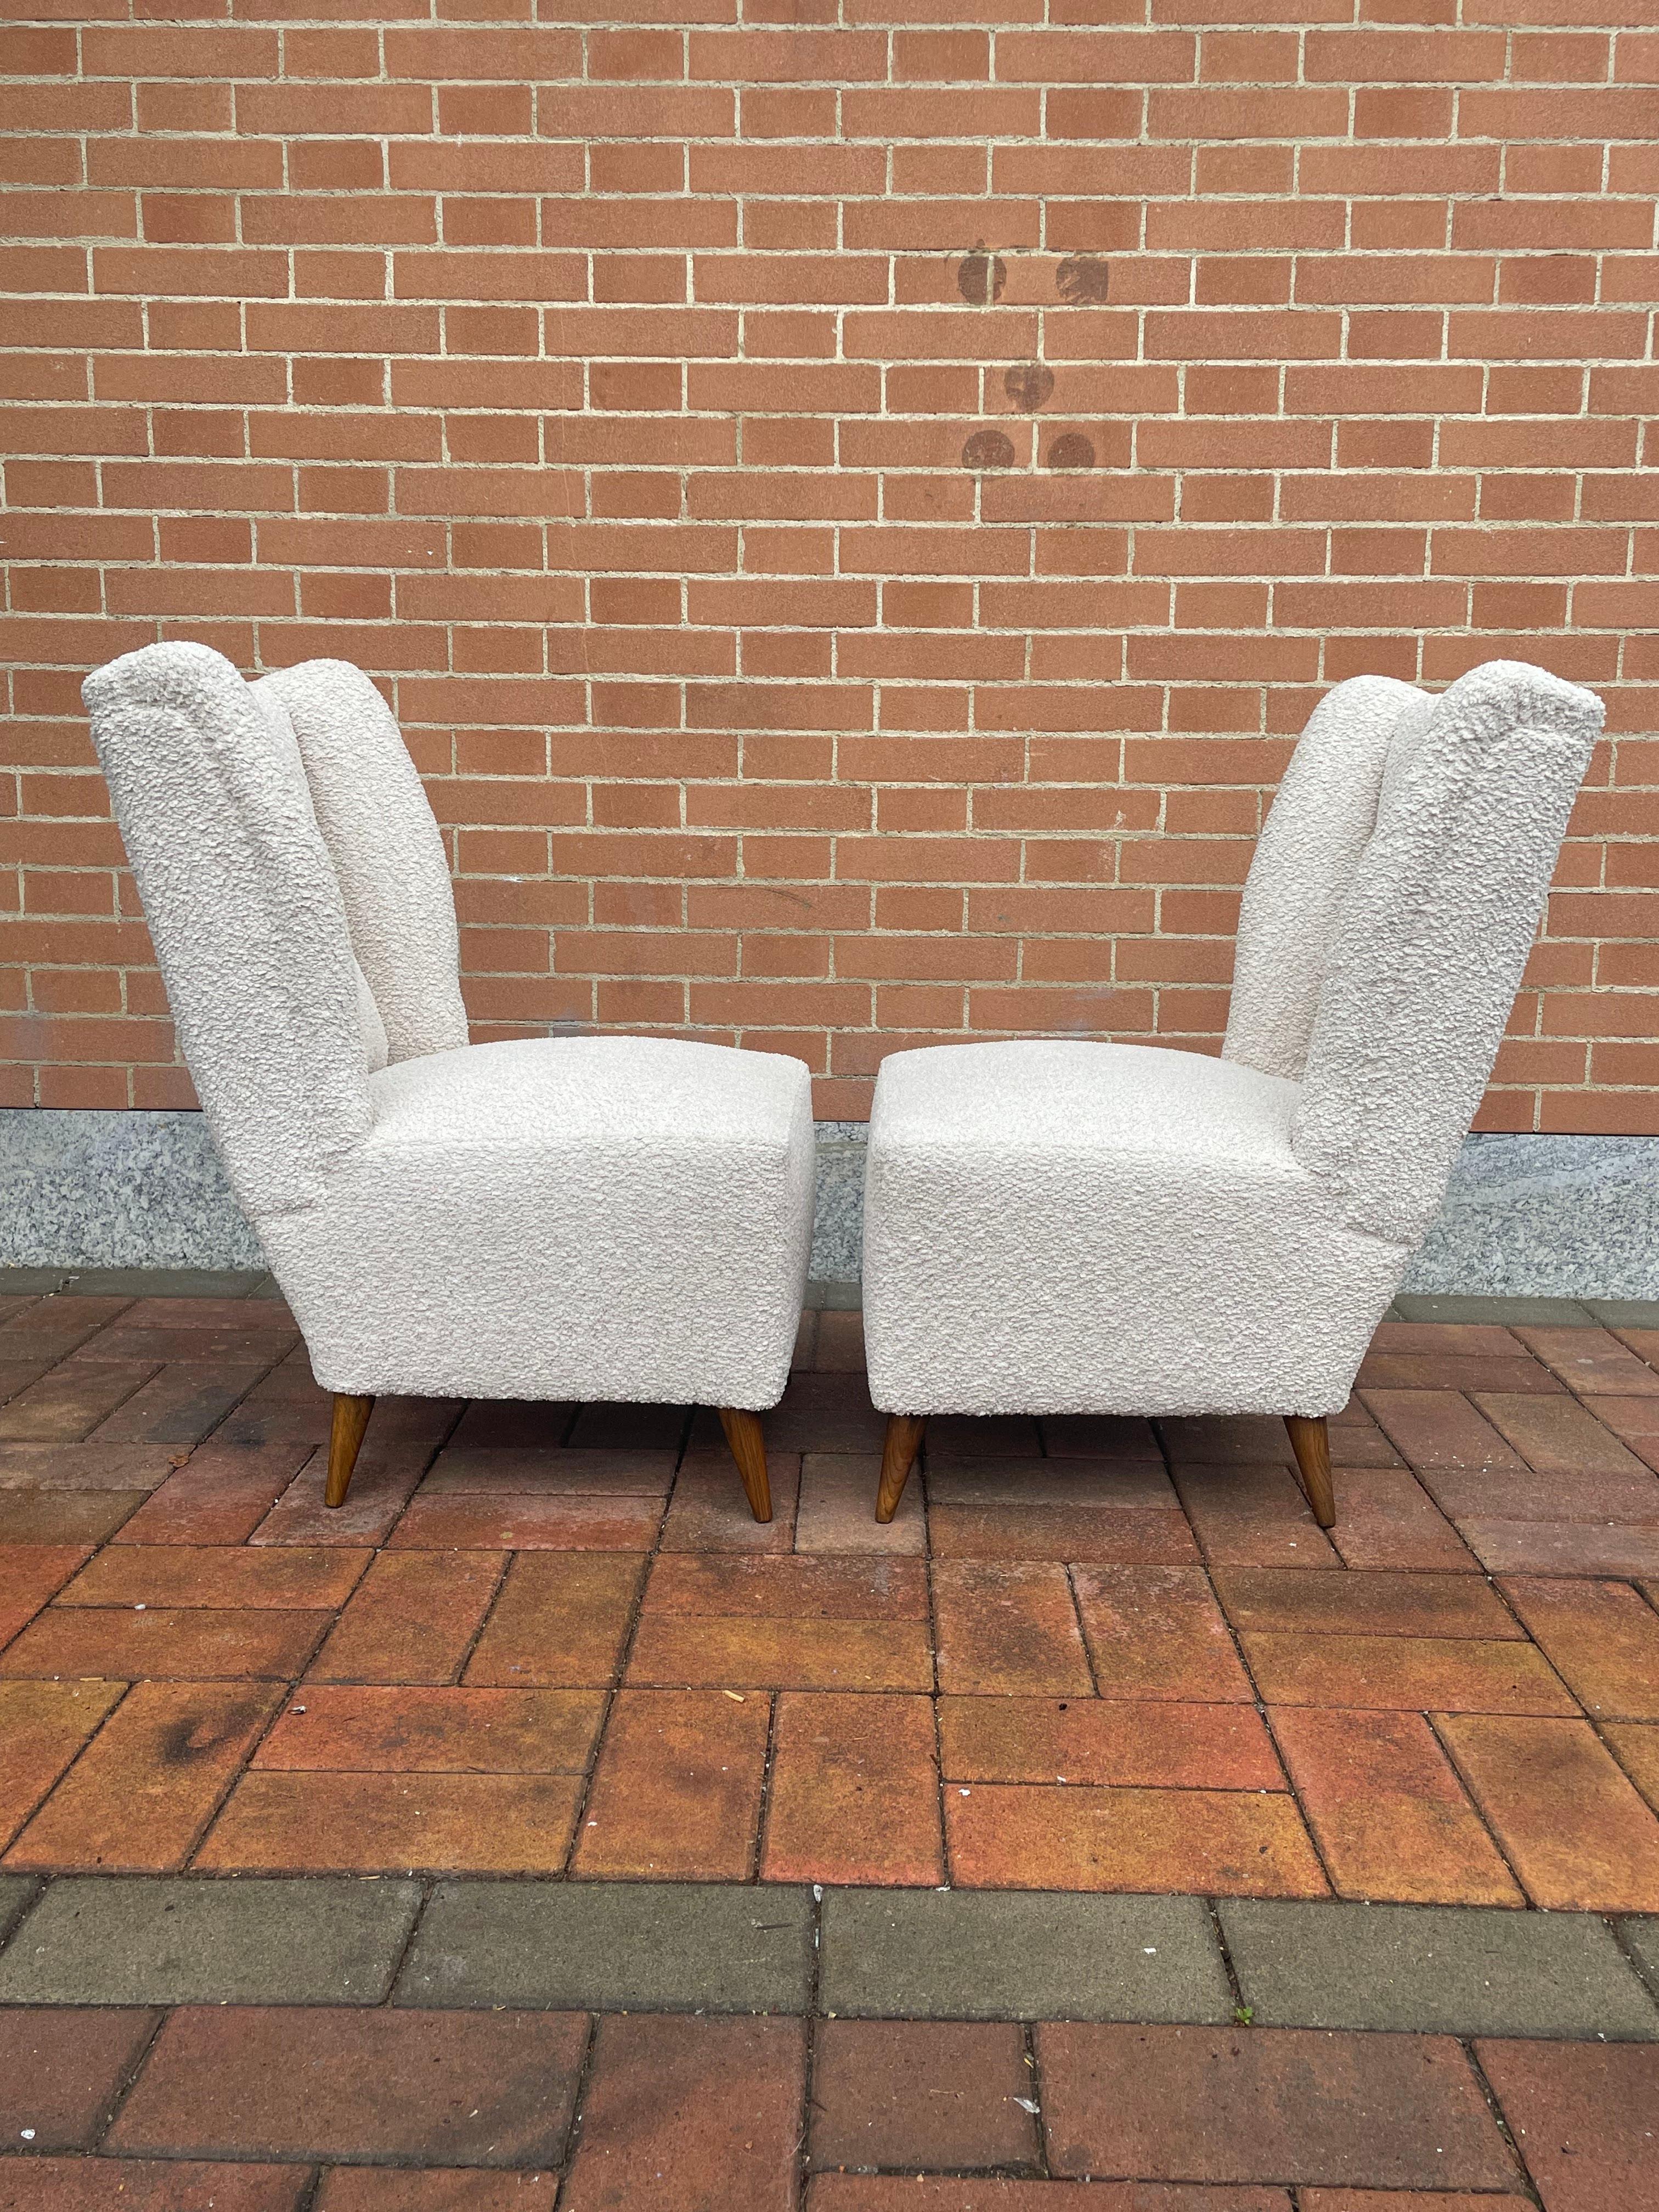 Pair of 1950s Slipper Chairs with New White Bouclé Upholstery For Sale 2